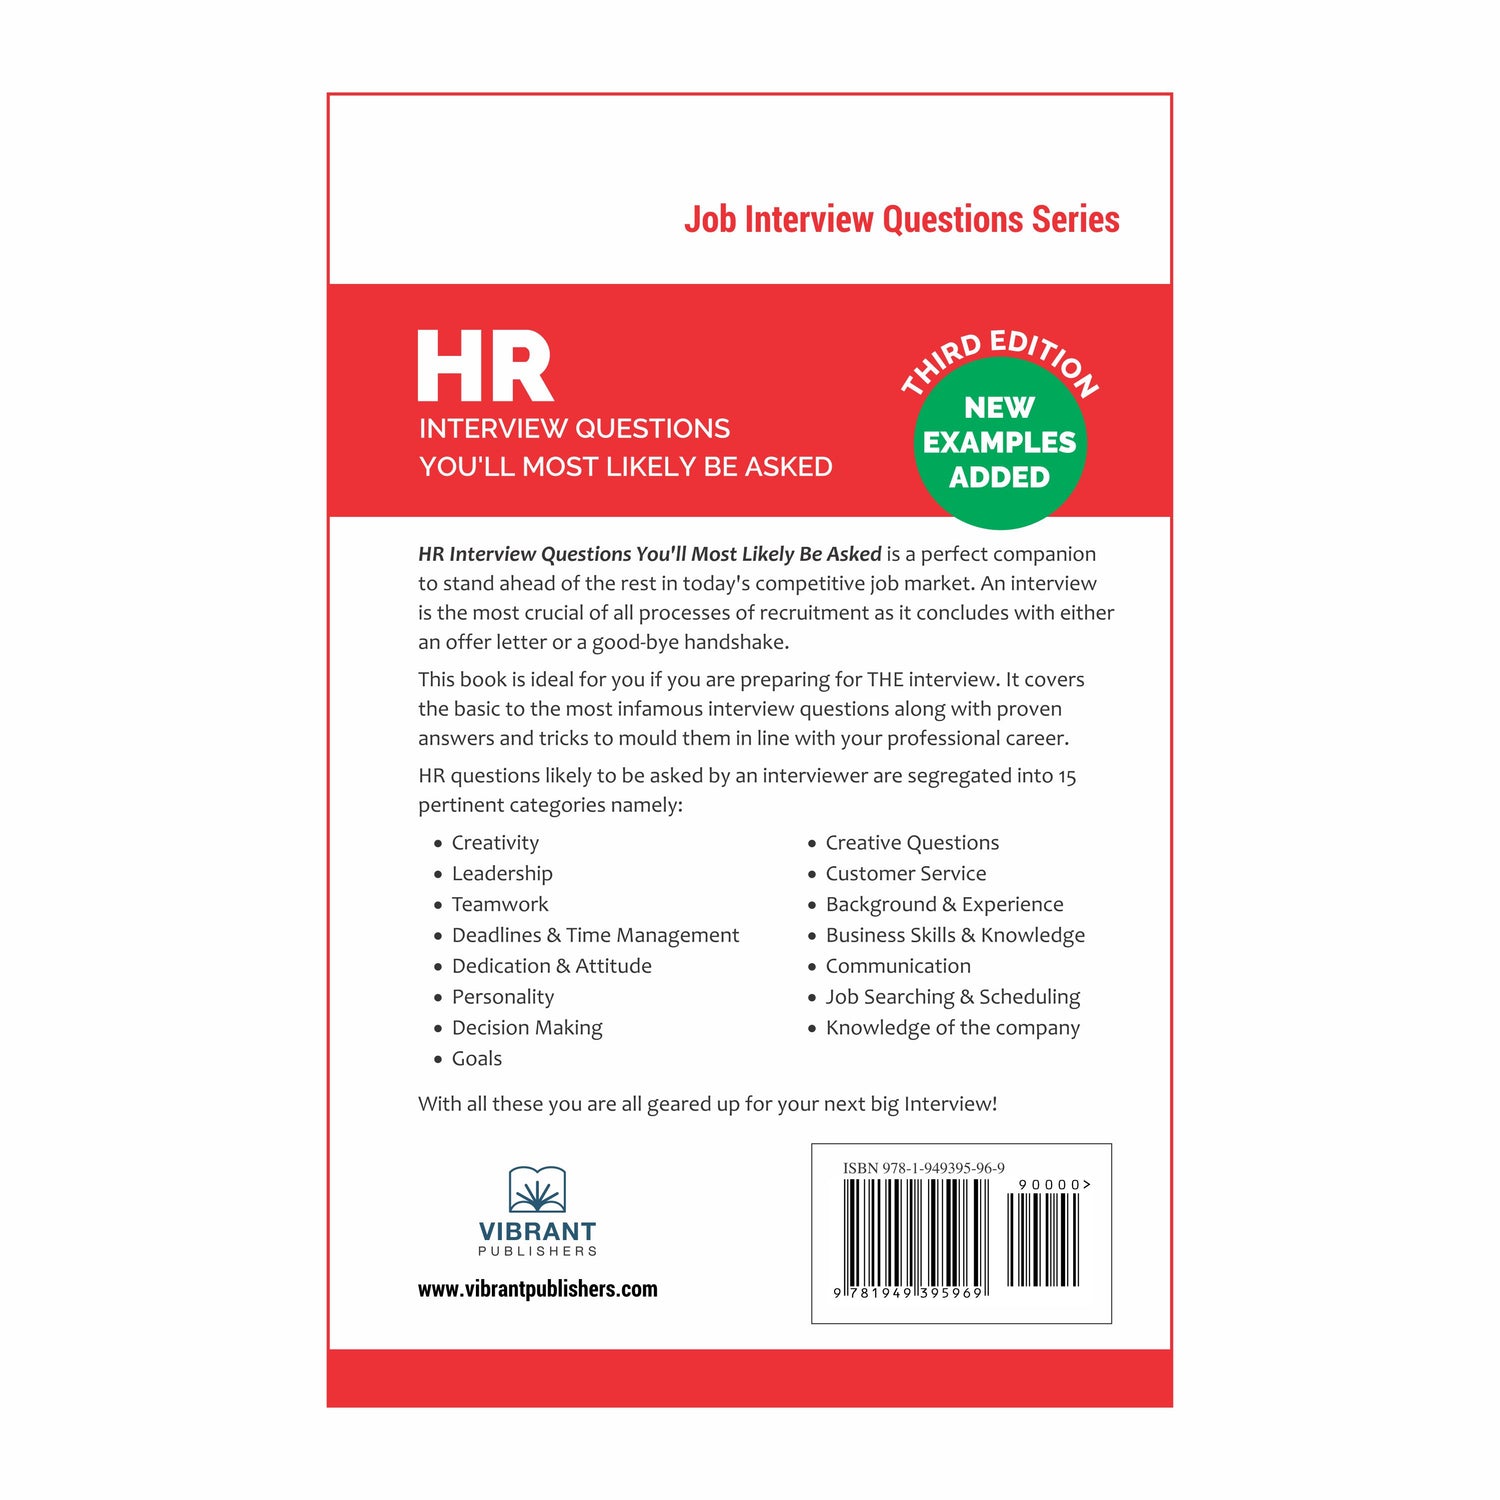 HR Interview Questions You’ll Most Likely Be Asked (Third Edition)